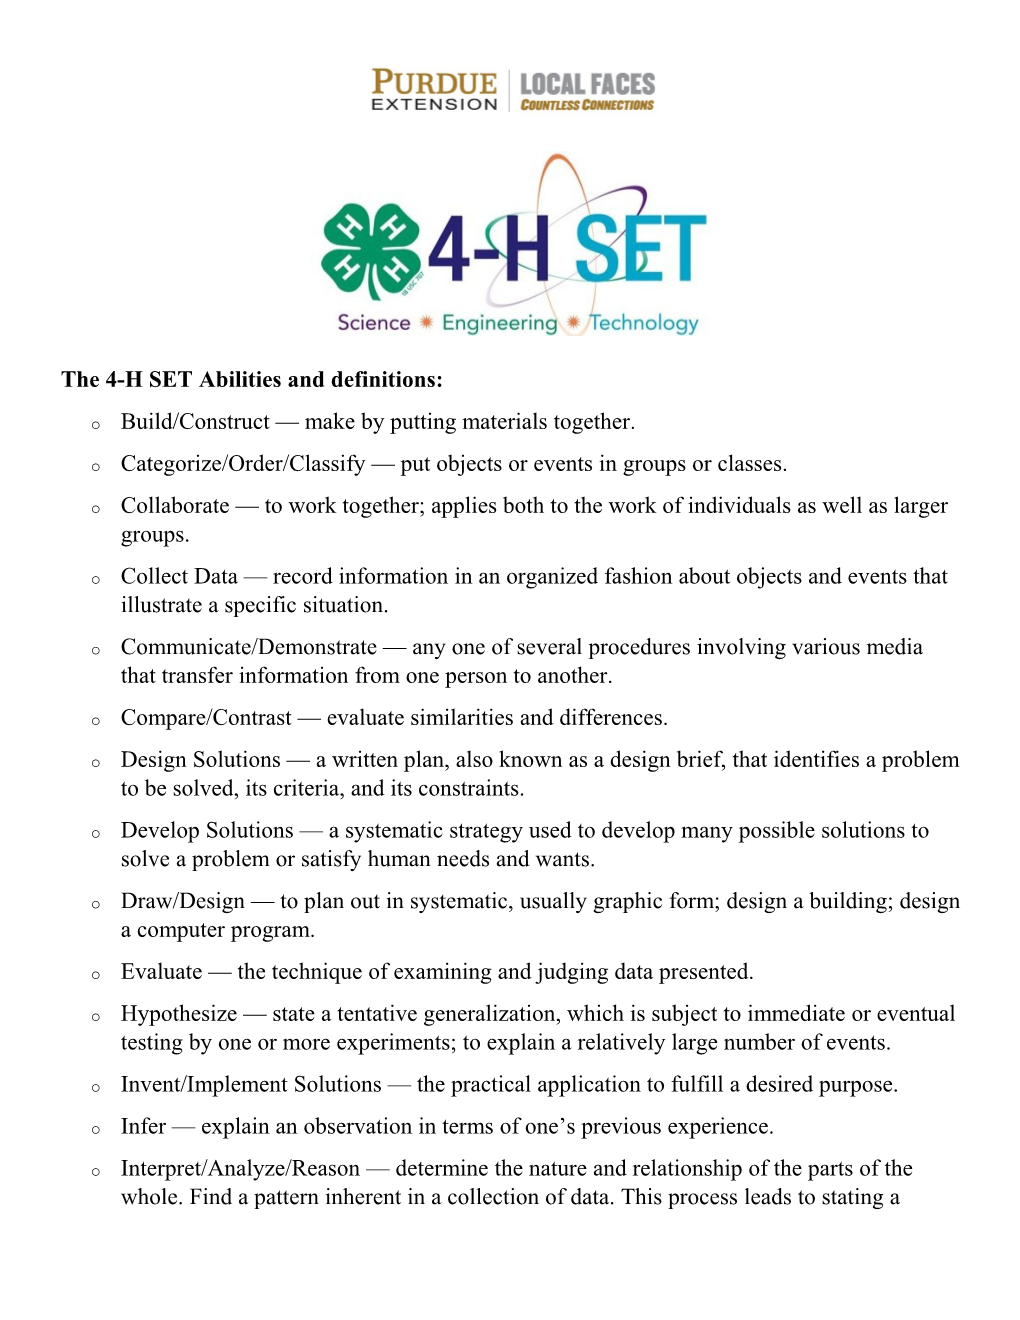 The 4-H SET Abilities and Definitions